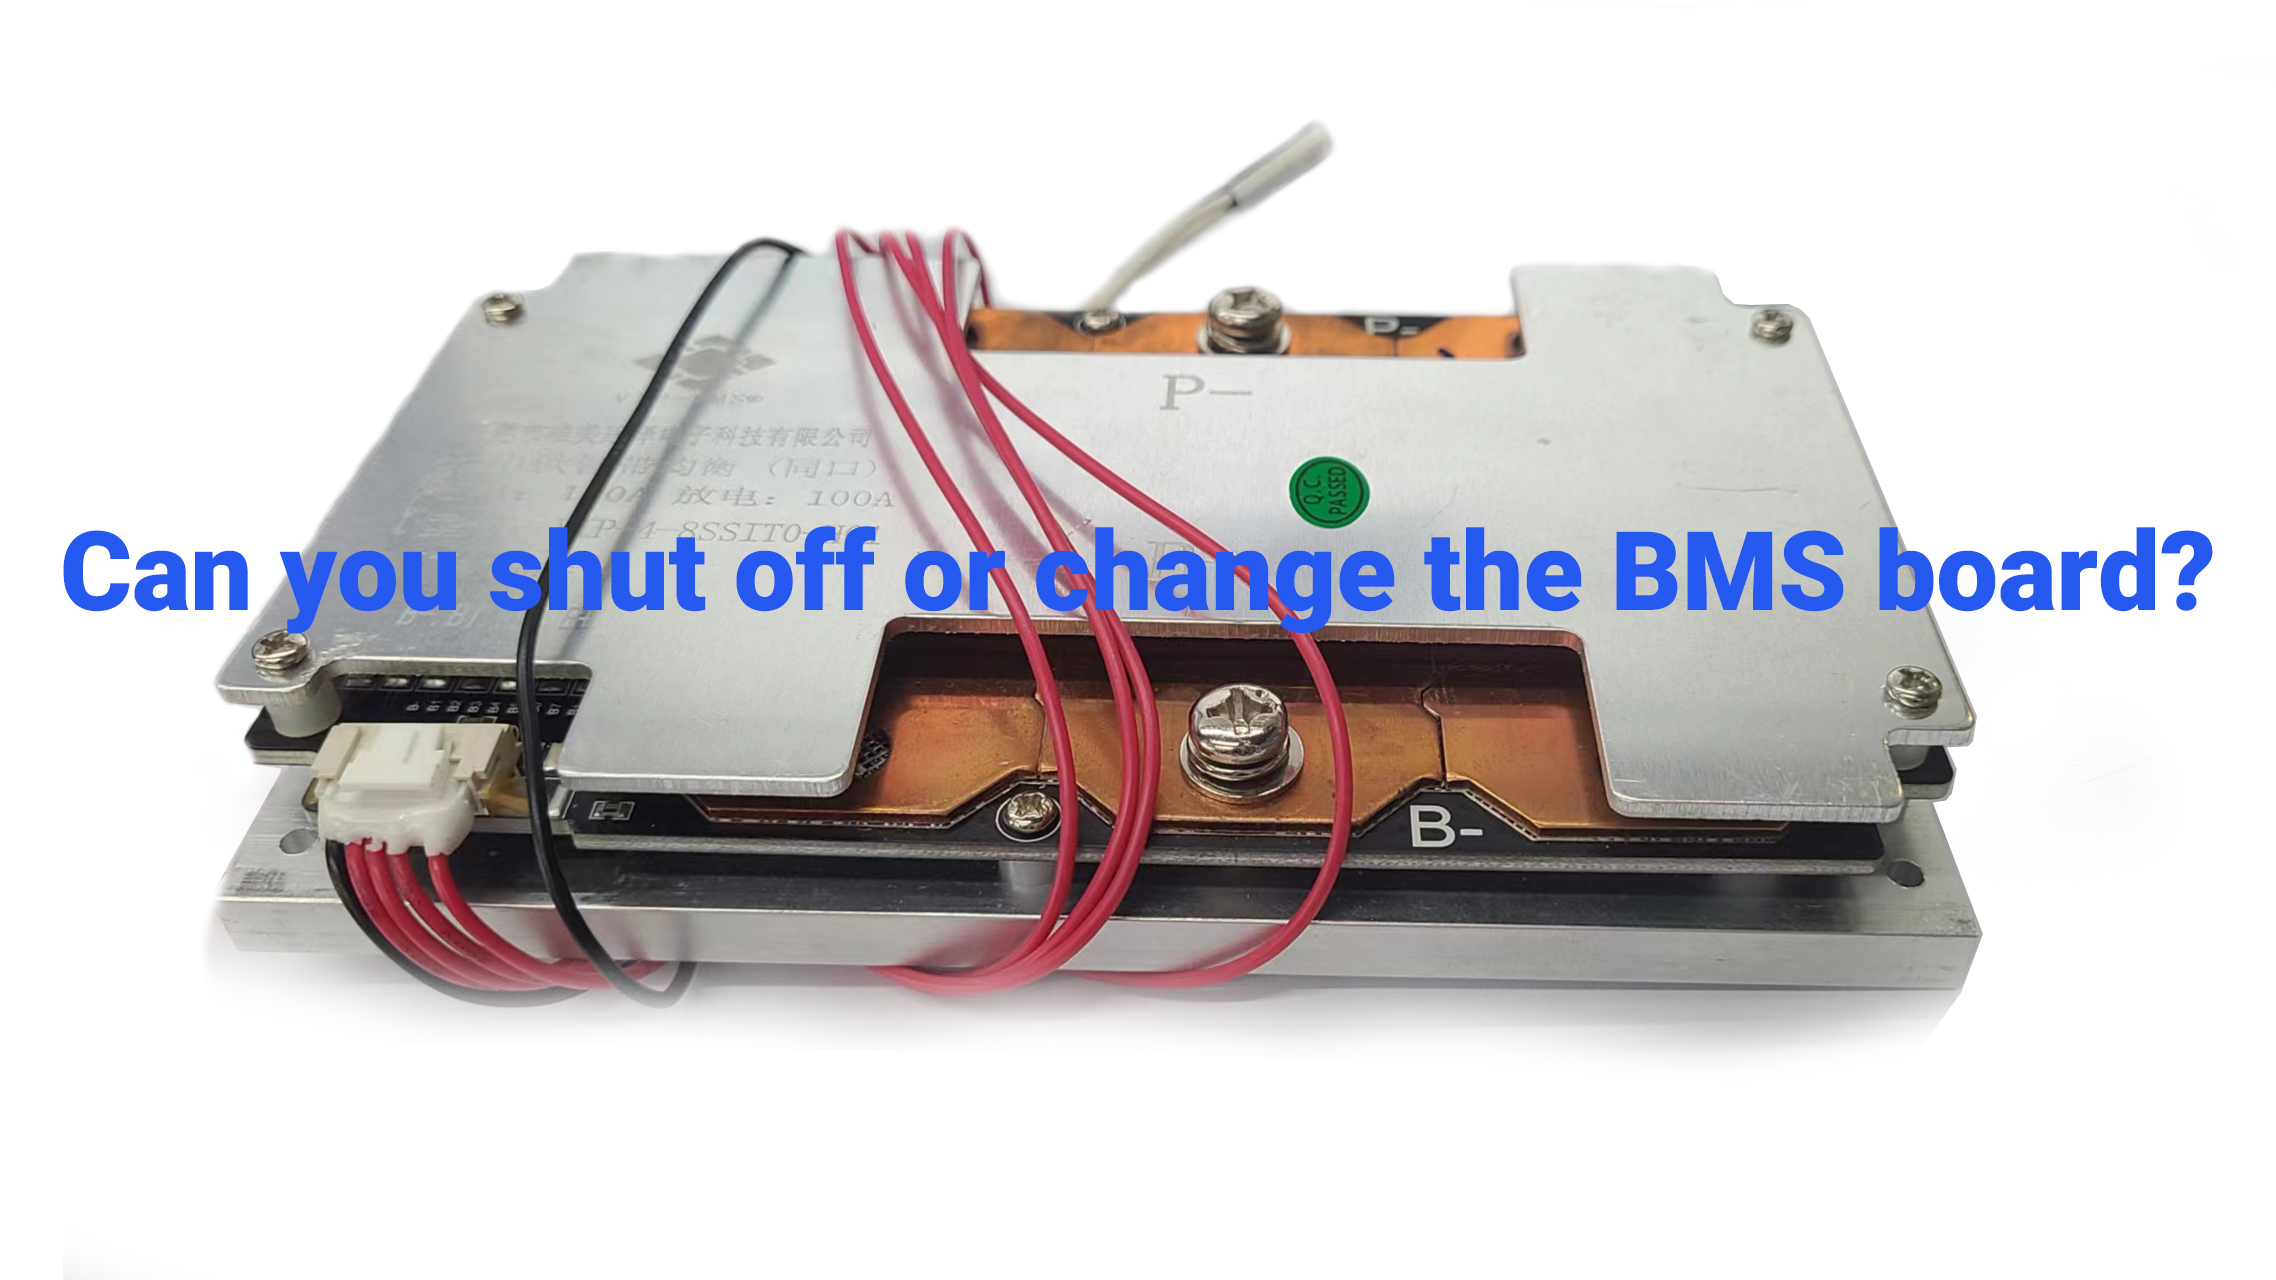 Can you shut off or change the BMS board